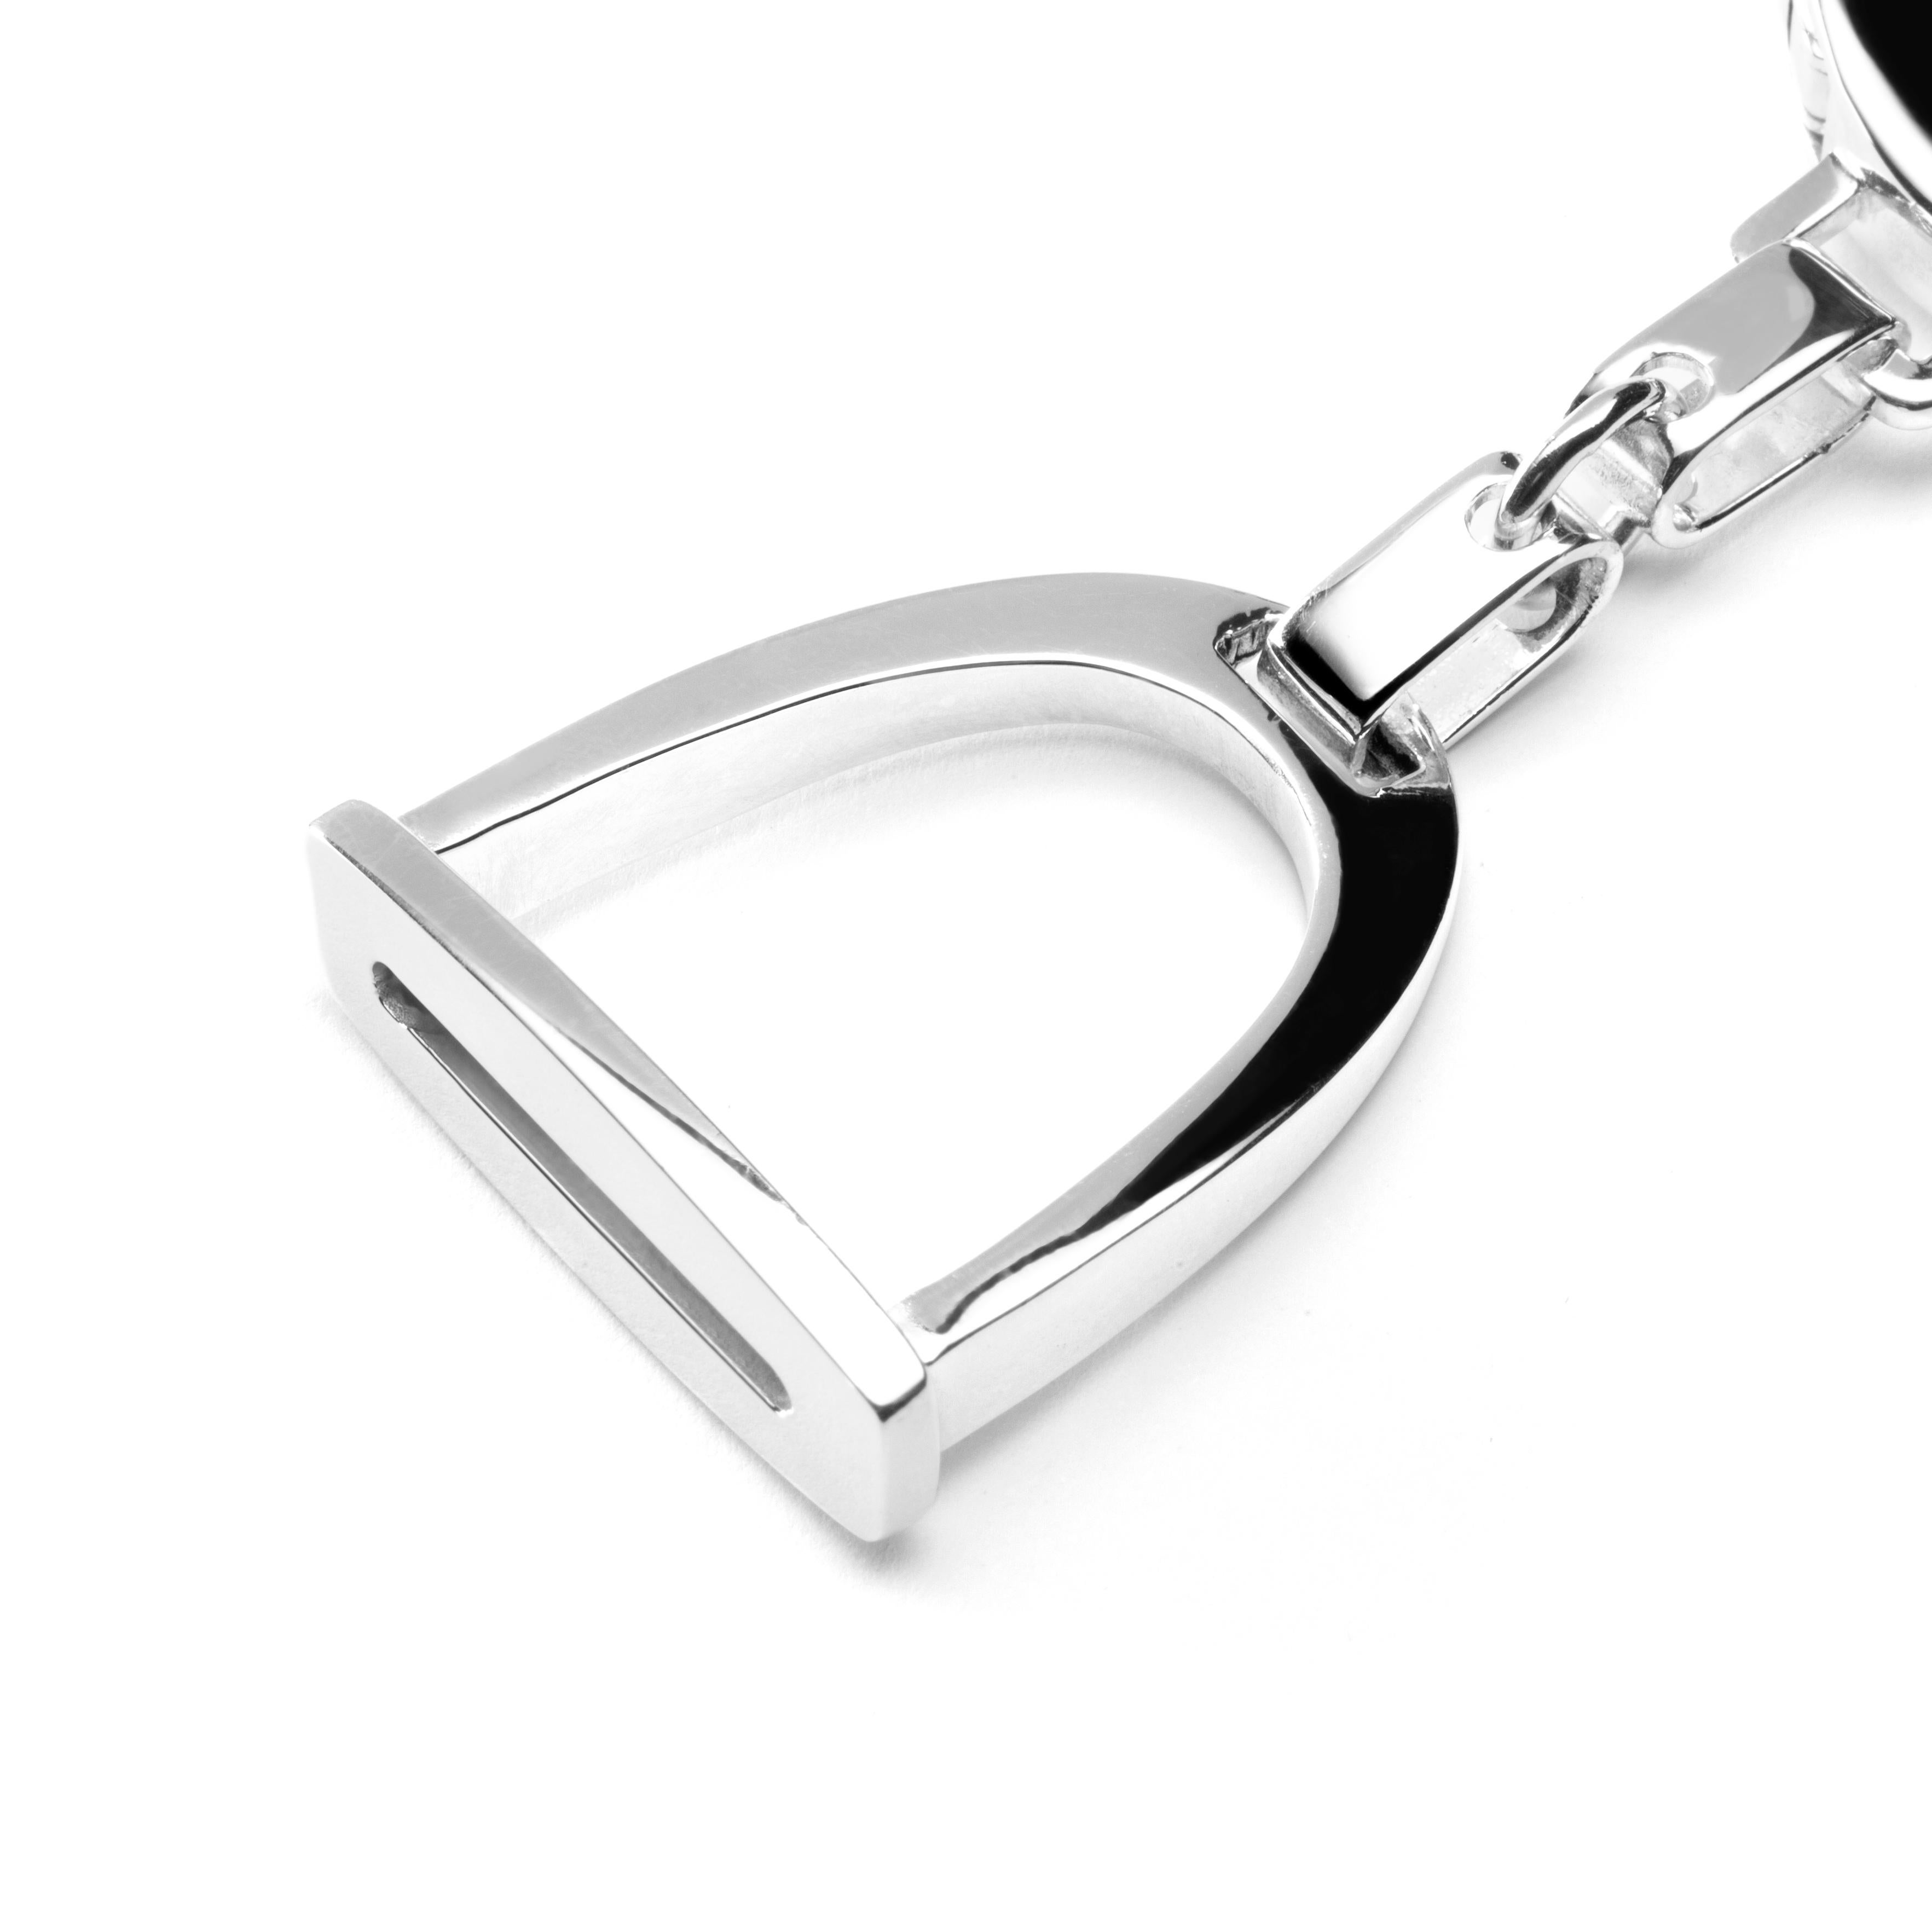 Jona design collection, hand crafted in Italy, rhodium plated sterling stirrup key holder.
Dimensions : L x 3.44 in/ 87.60 mm - W x 1.05 in/ 26.81 mm.
All Jona jewelry is new and has never been previously owned or worn. Each item will arrive at your